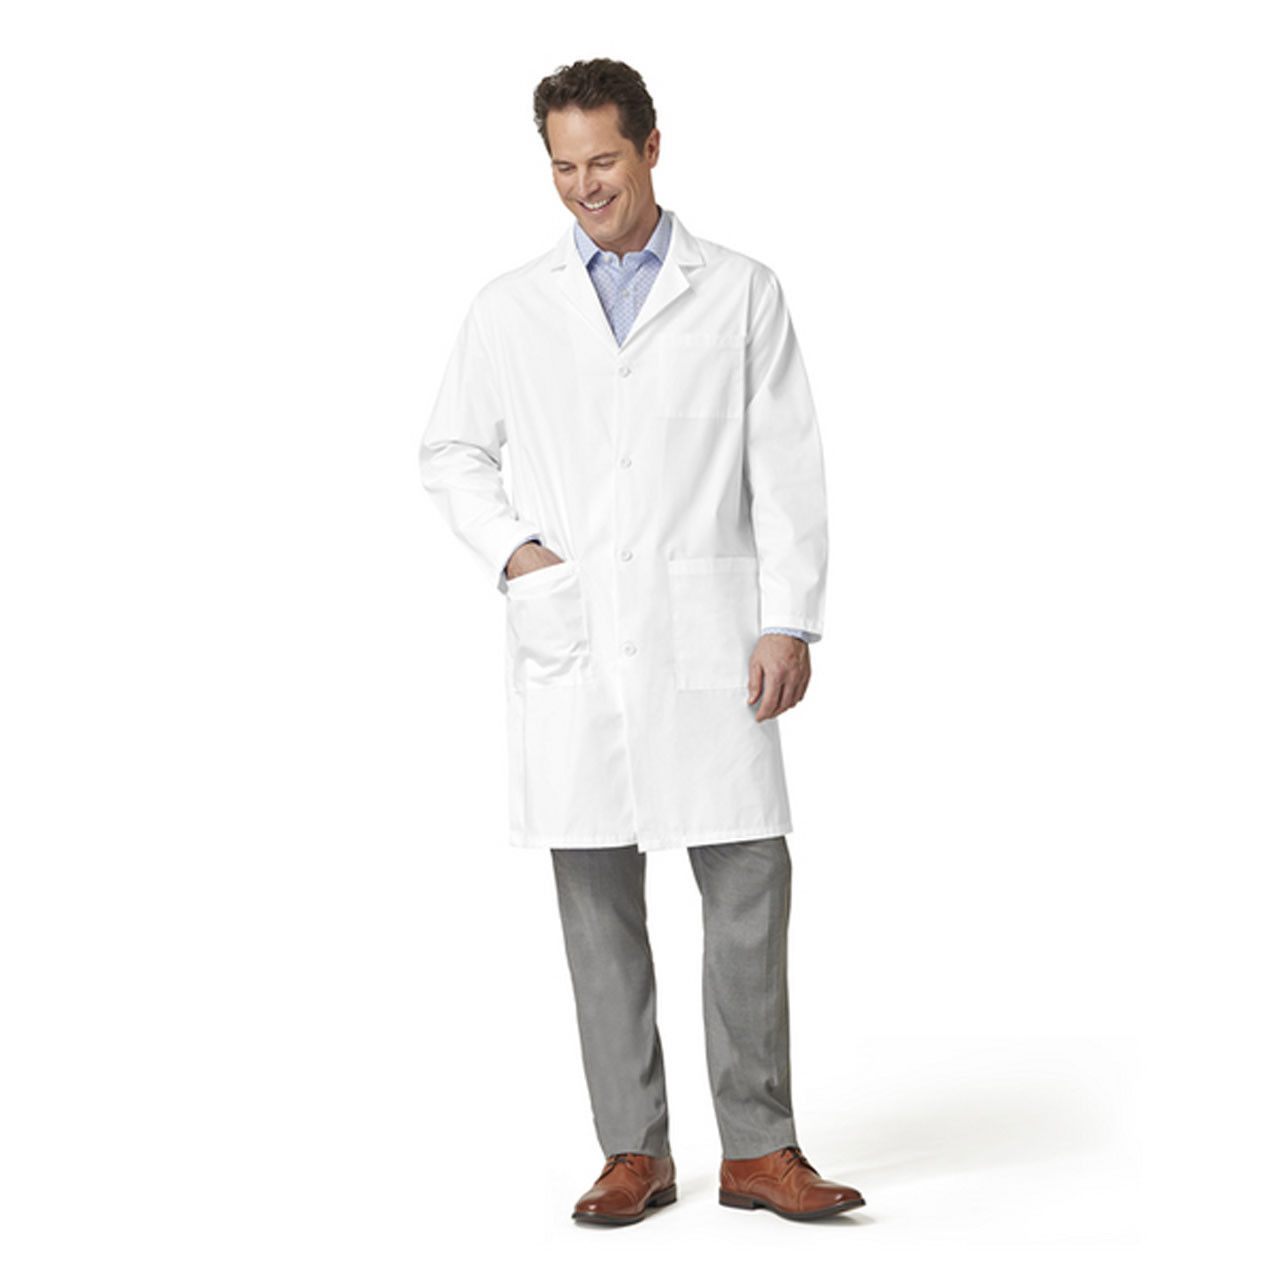 Is the Unisex Cotton Lab Coat by Fashion Seal designed for my needs?